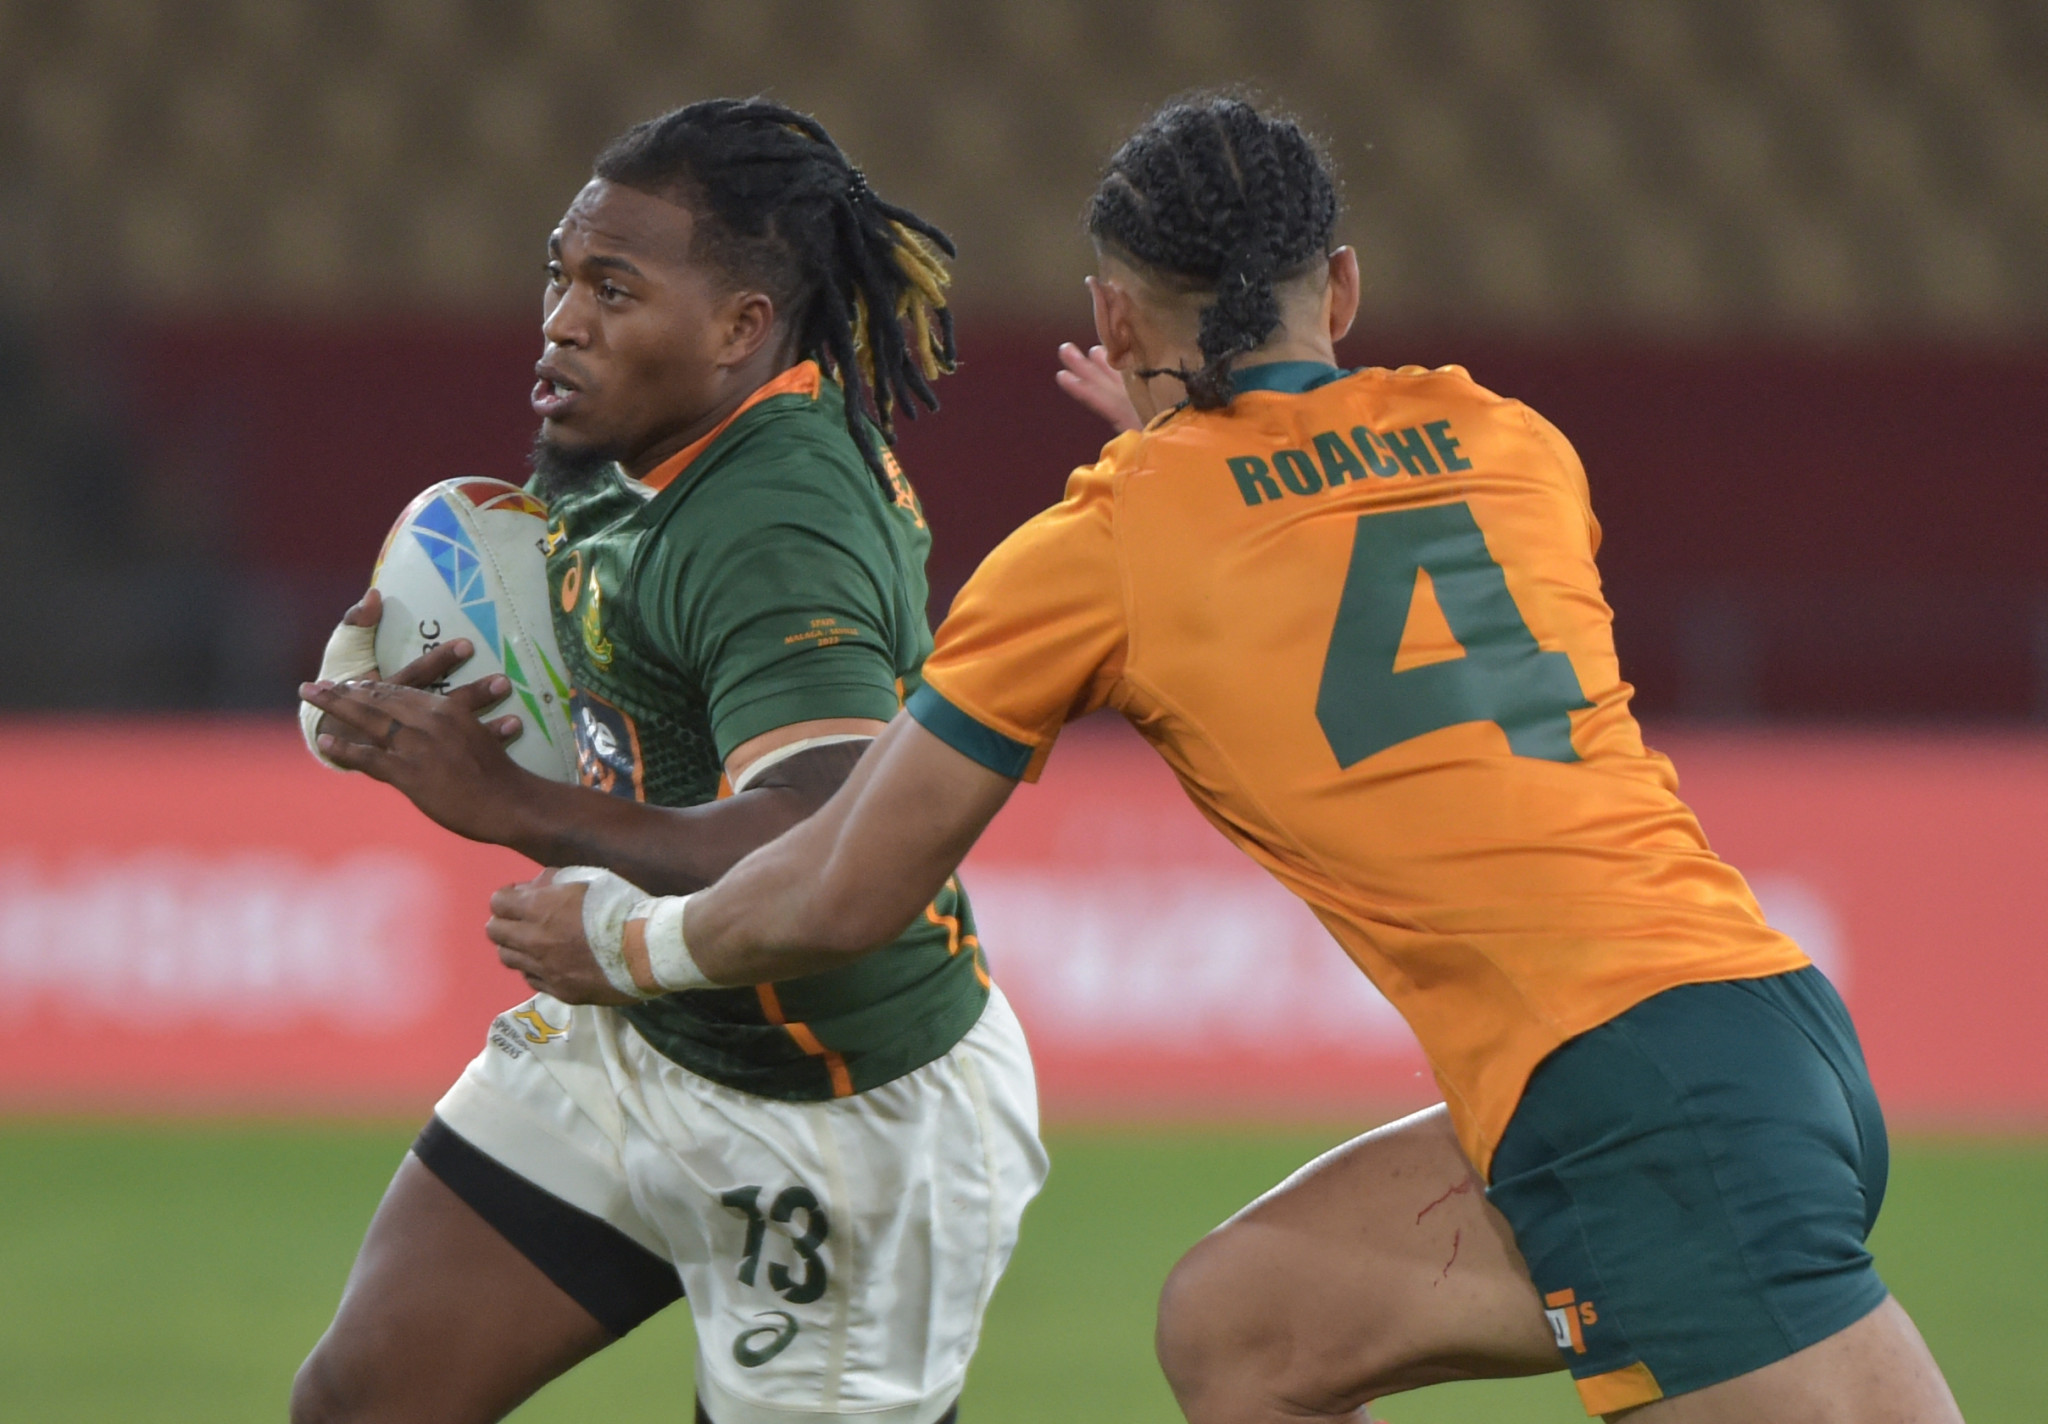 South Africa are set to face Australia as they look to retain their Canada World Rugby Sevens Series title ©Getty Images